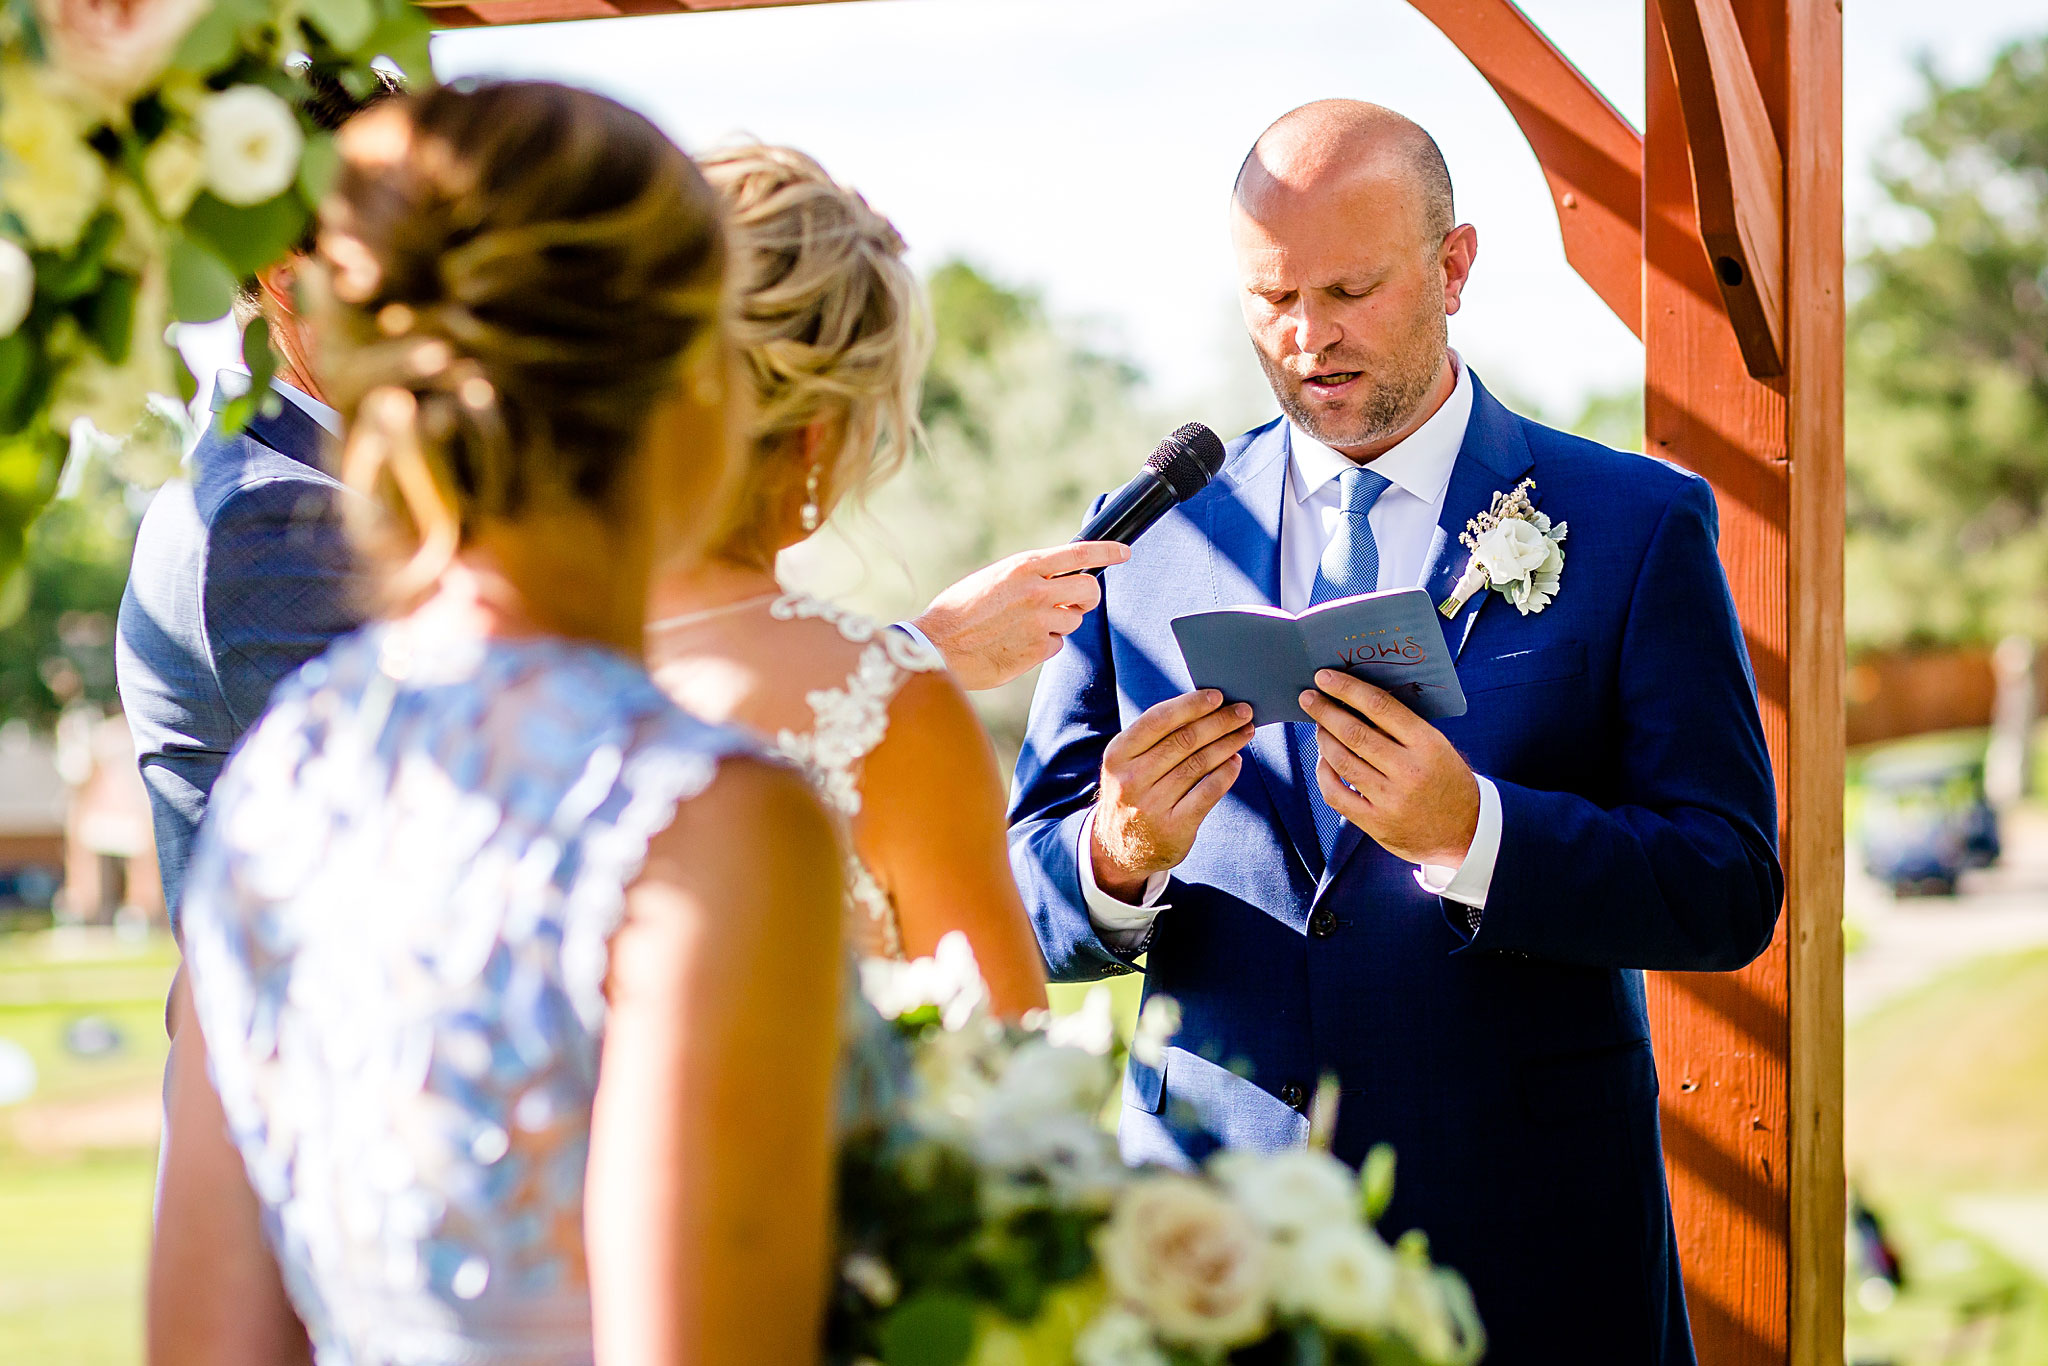 Groom reading his personal vows. Kelli & Jason's golf course wedding at The Ranch Country Club by Colorado Wedding Photographer Jennifer Garza, Small wedding ideas, Intimate wedding, Golf Course Wedding, Country Club Wedding, Summer Wedding, Golf Wedding, Wedding planning, Colorado Wedding Photographer, Colorado Elopement Photographer, Colorado Elopement, Colorado Wedding, Denver Wedding Photographer, Denver Wedding, Wedding Inspiration, Summer Wedding Inspiration, Covid Wedding